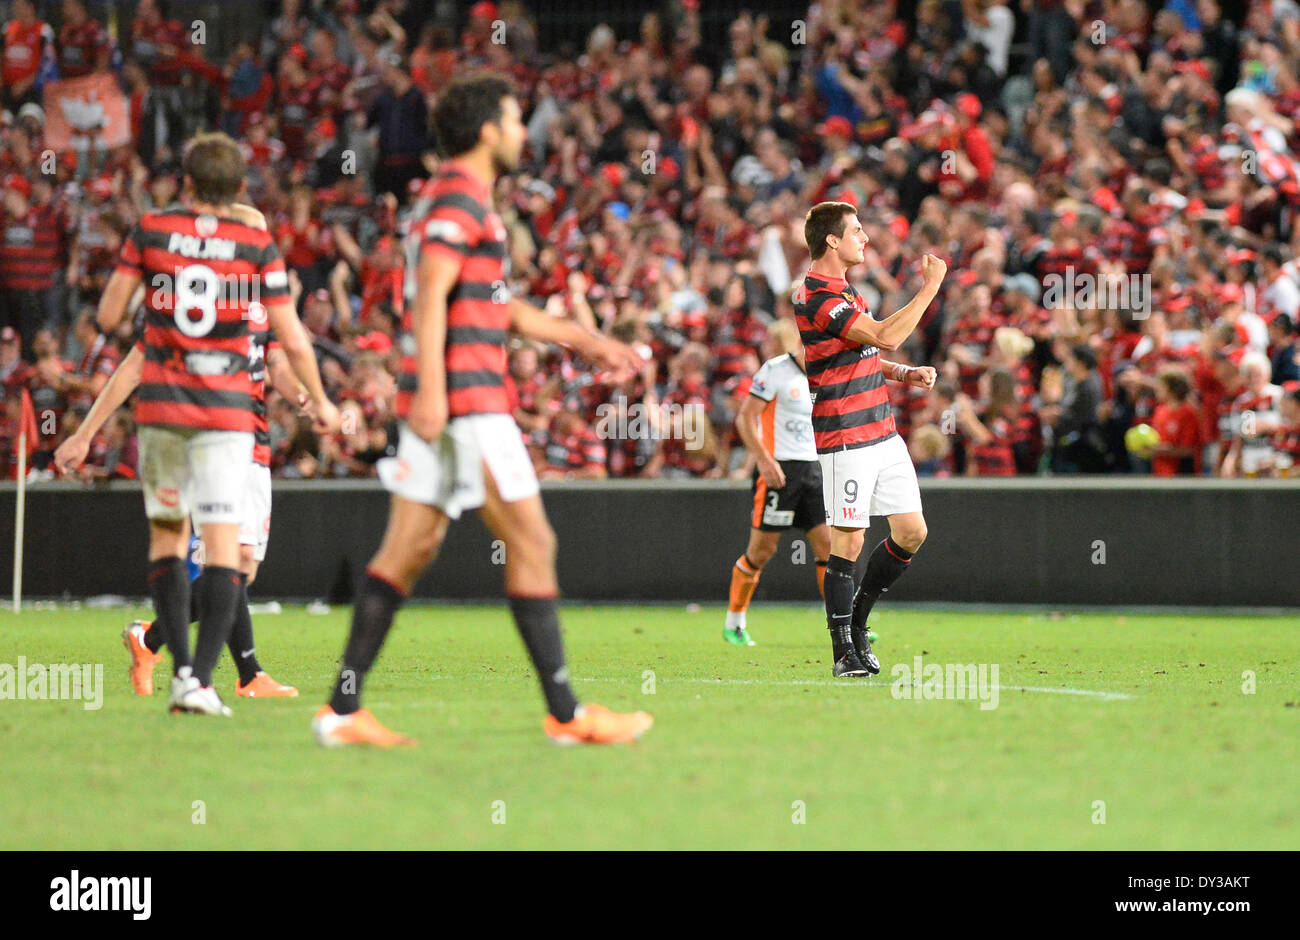 05.04.2014 Sydney, Australia. Wanderers forward Tomi Juric celebrates his goal during the Hyundai A League game between Western Sydney Wanderers FC and Brisbane Roar FC from the Pirtek Stadium, Parramatta. The game ended in a 1-1 draw. Stock Photo